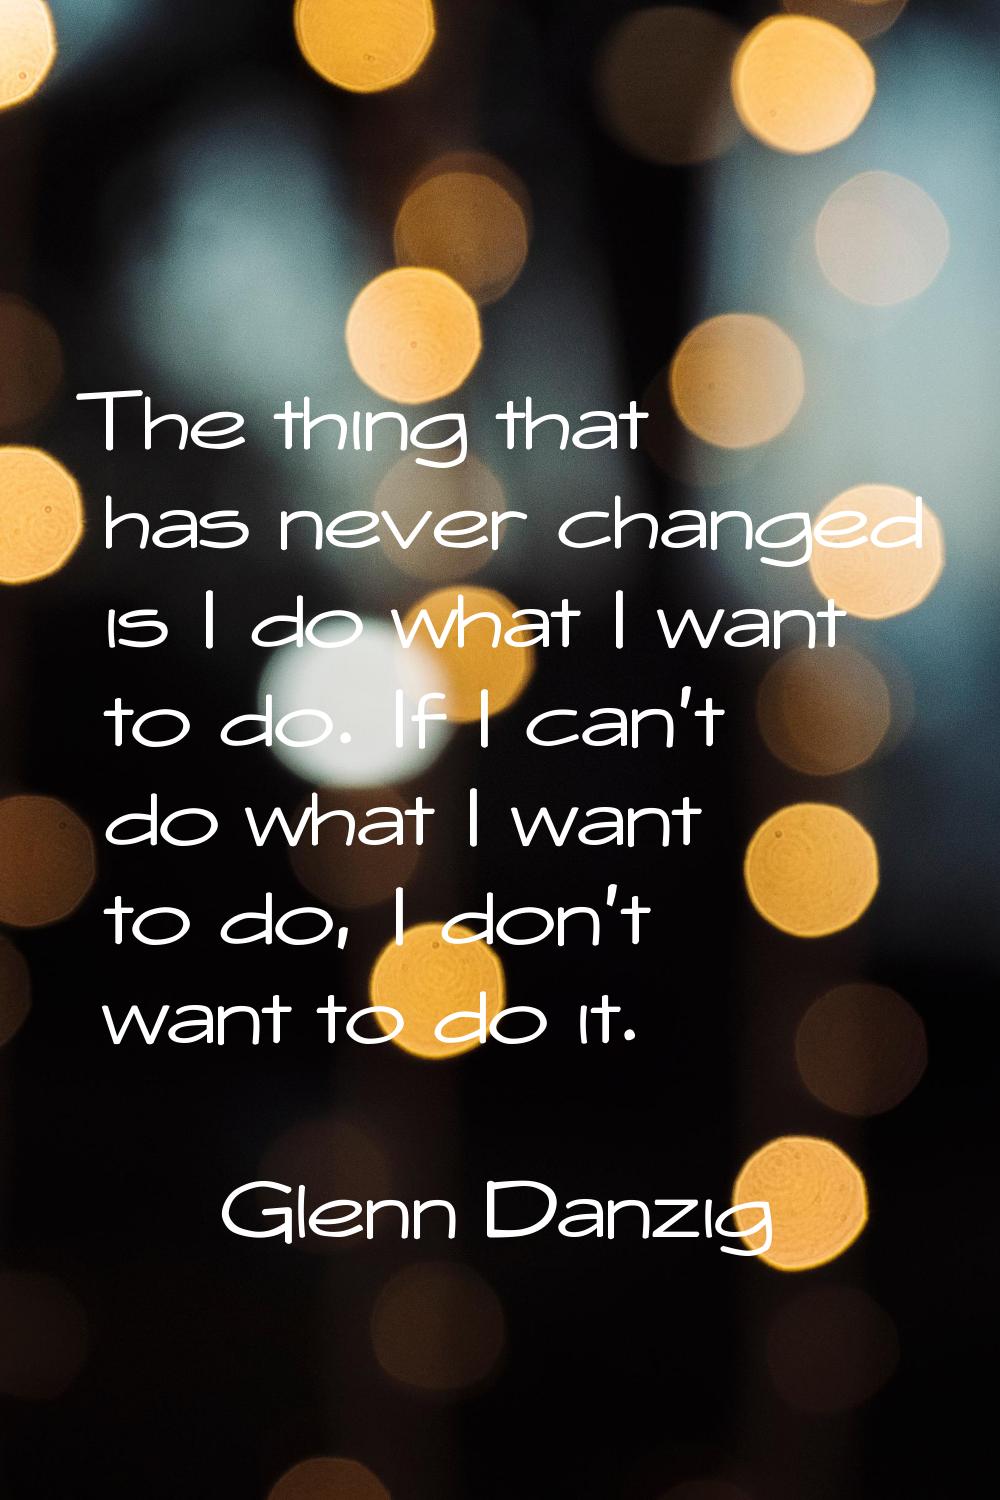 The thing that has never changed is I do what I want to do. If I can't do what I want to do, I don'